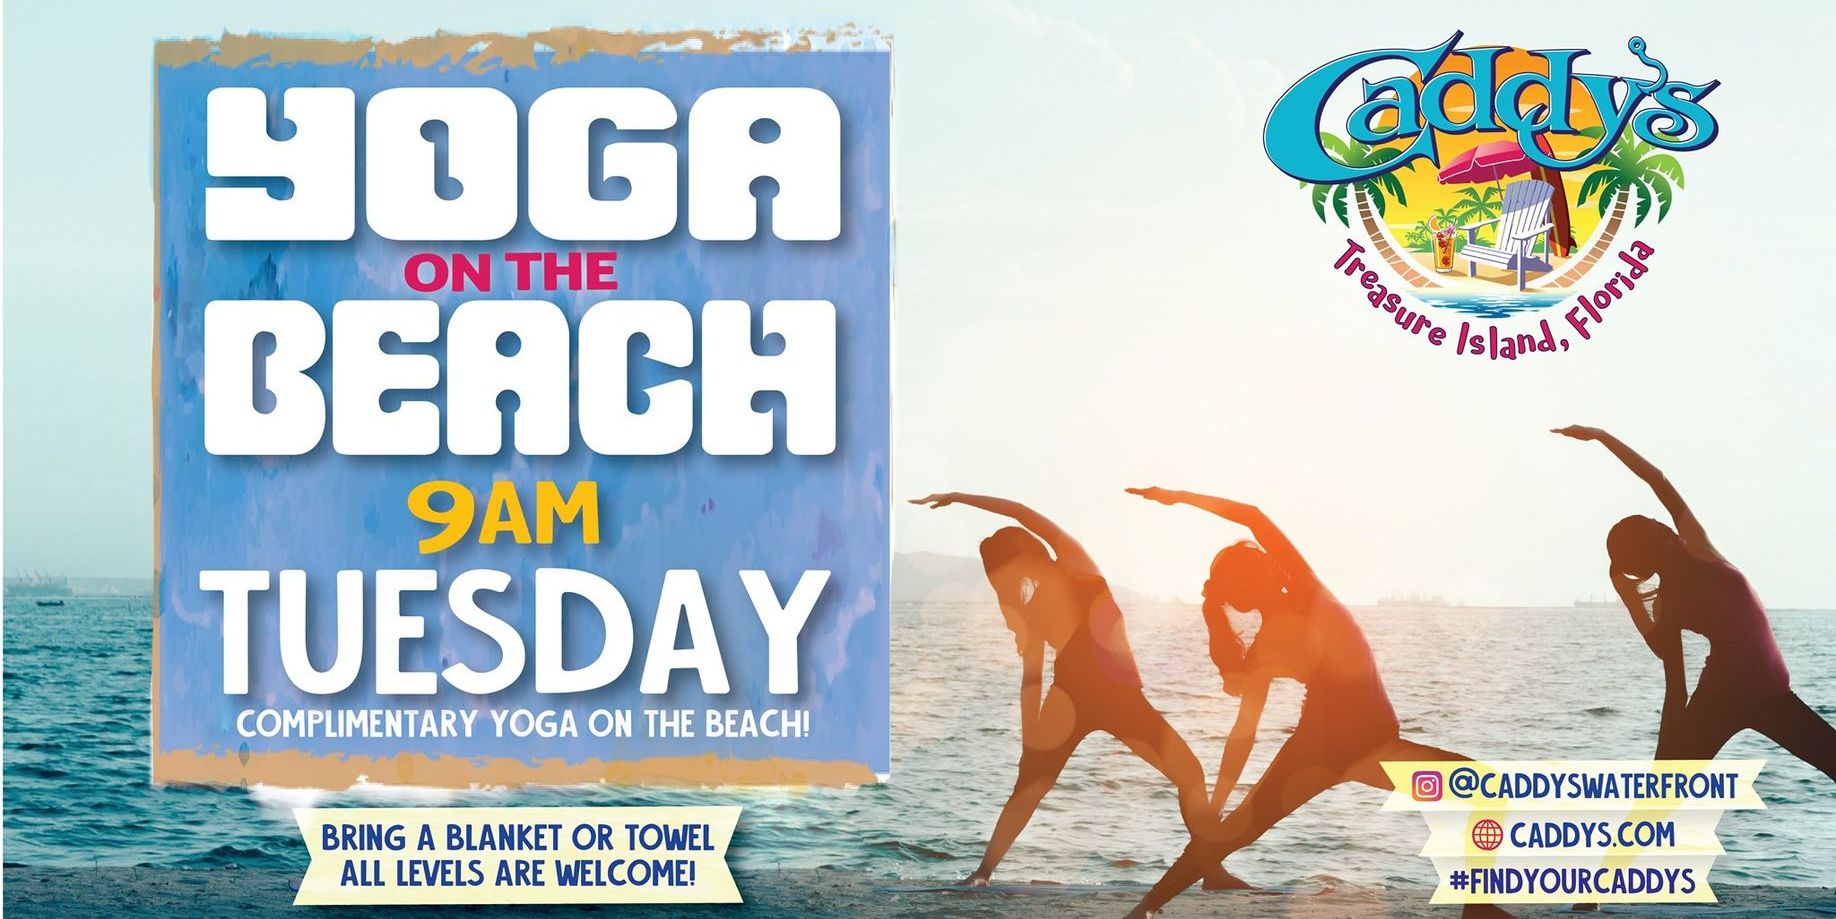 Tuesday Yoga on the Beach promotional image